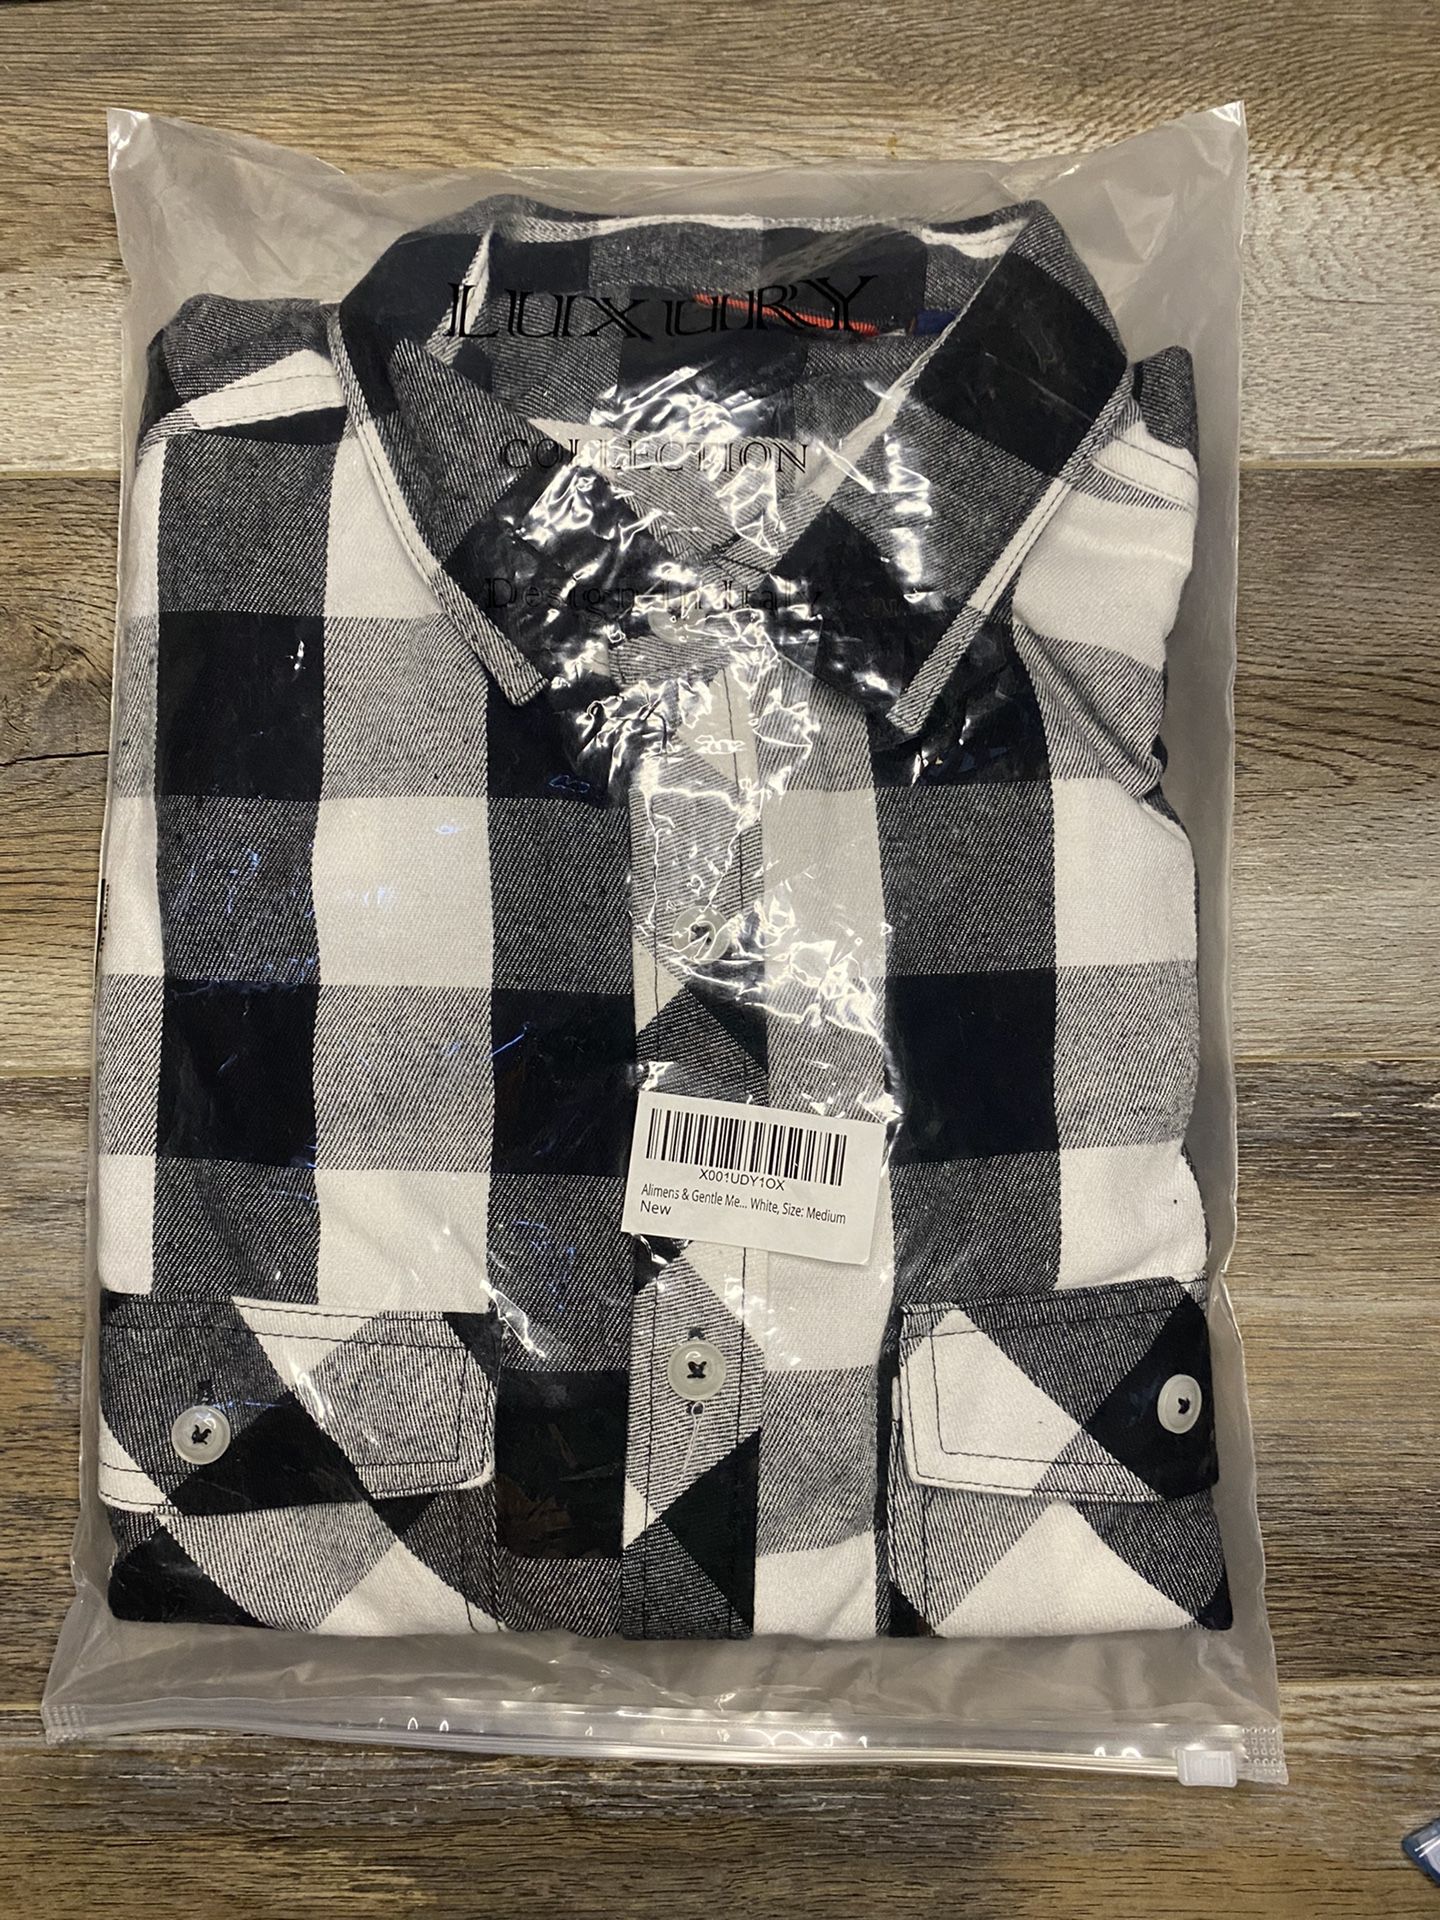 Men’s Button Down Regular Fit Long Sleeve Plaid Flannel Casual Shirts 